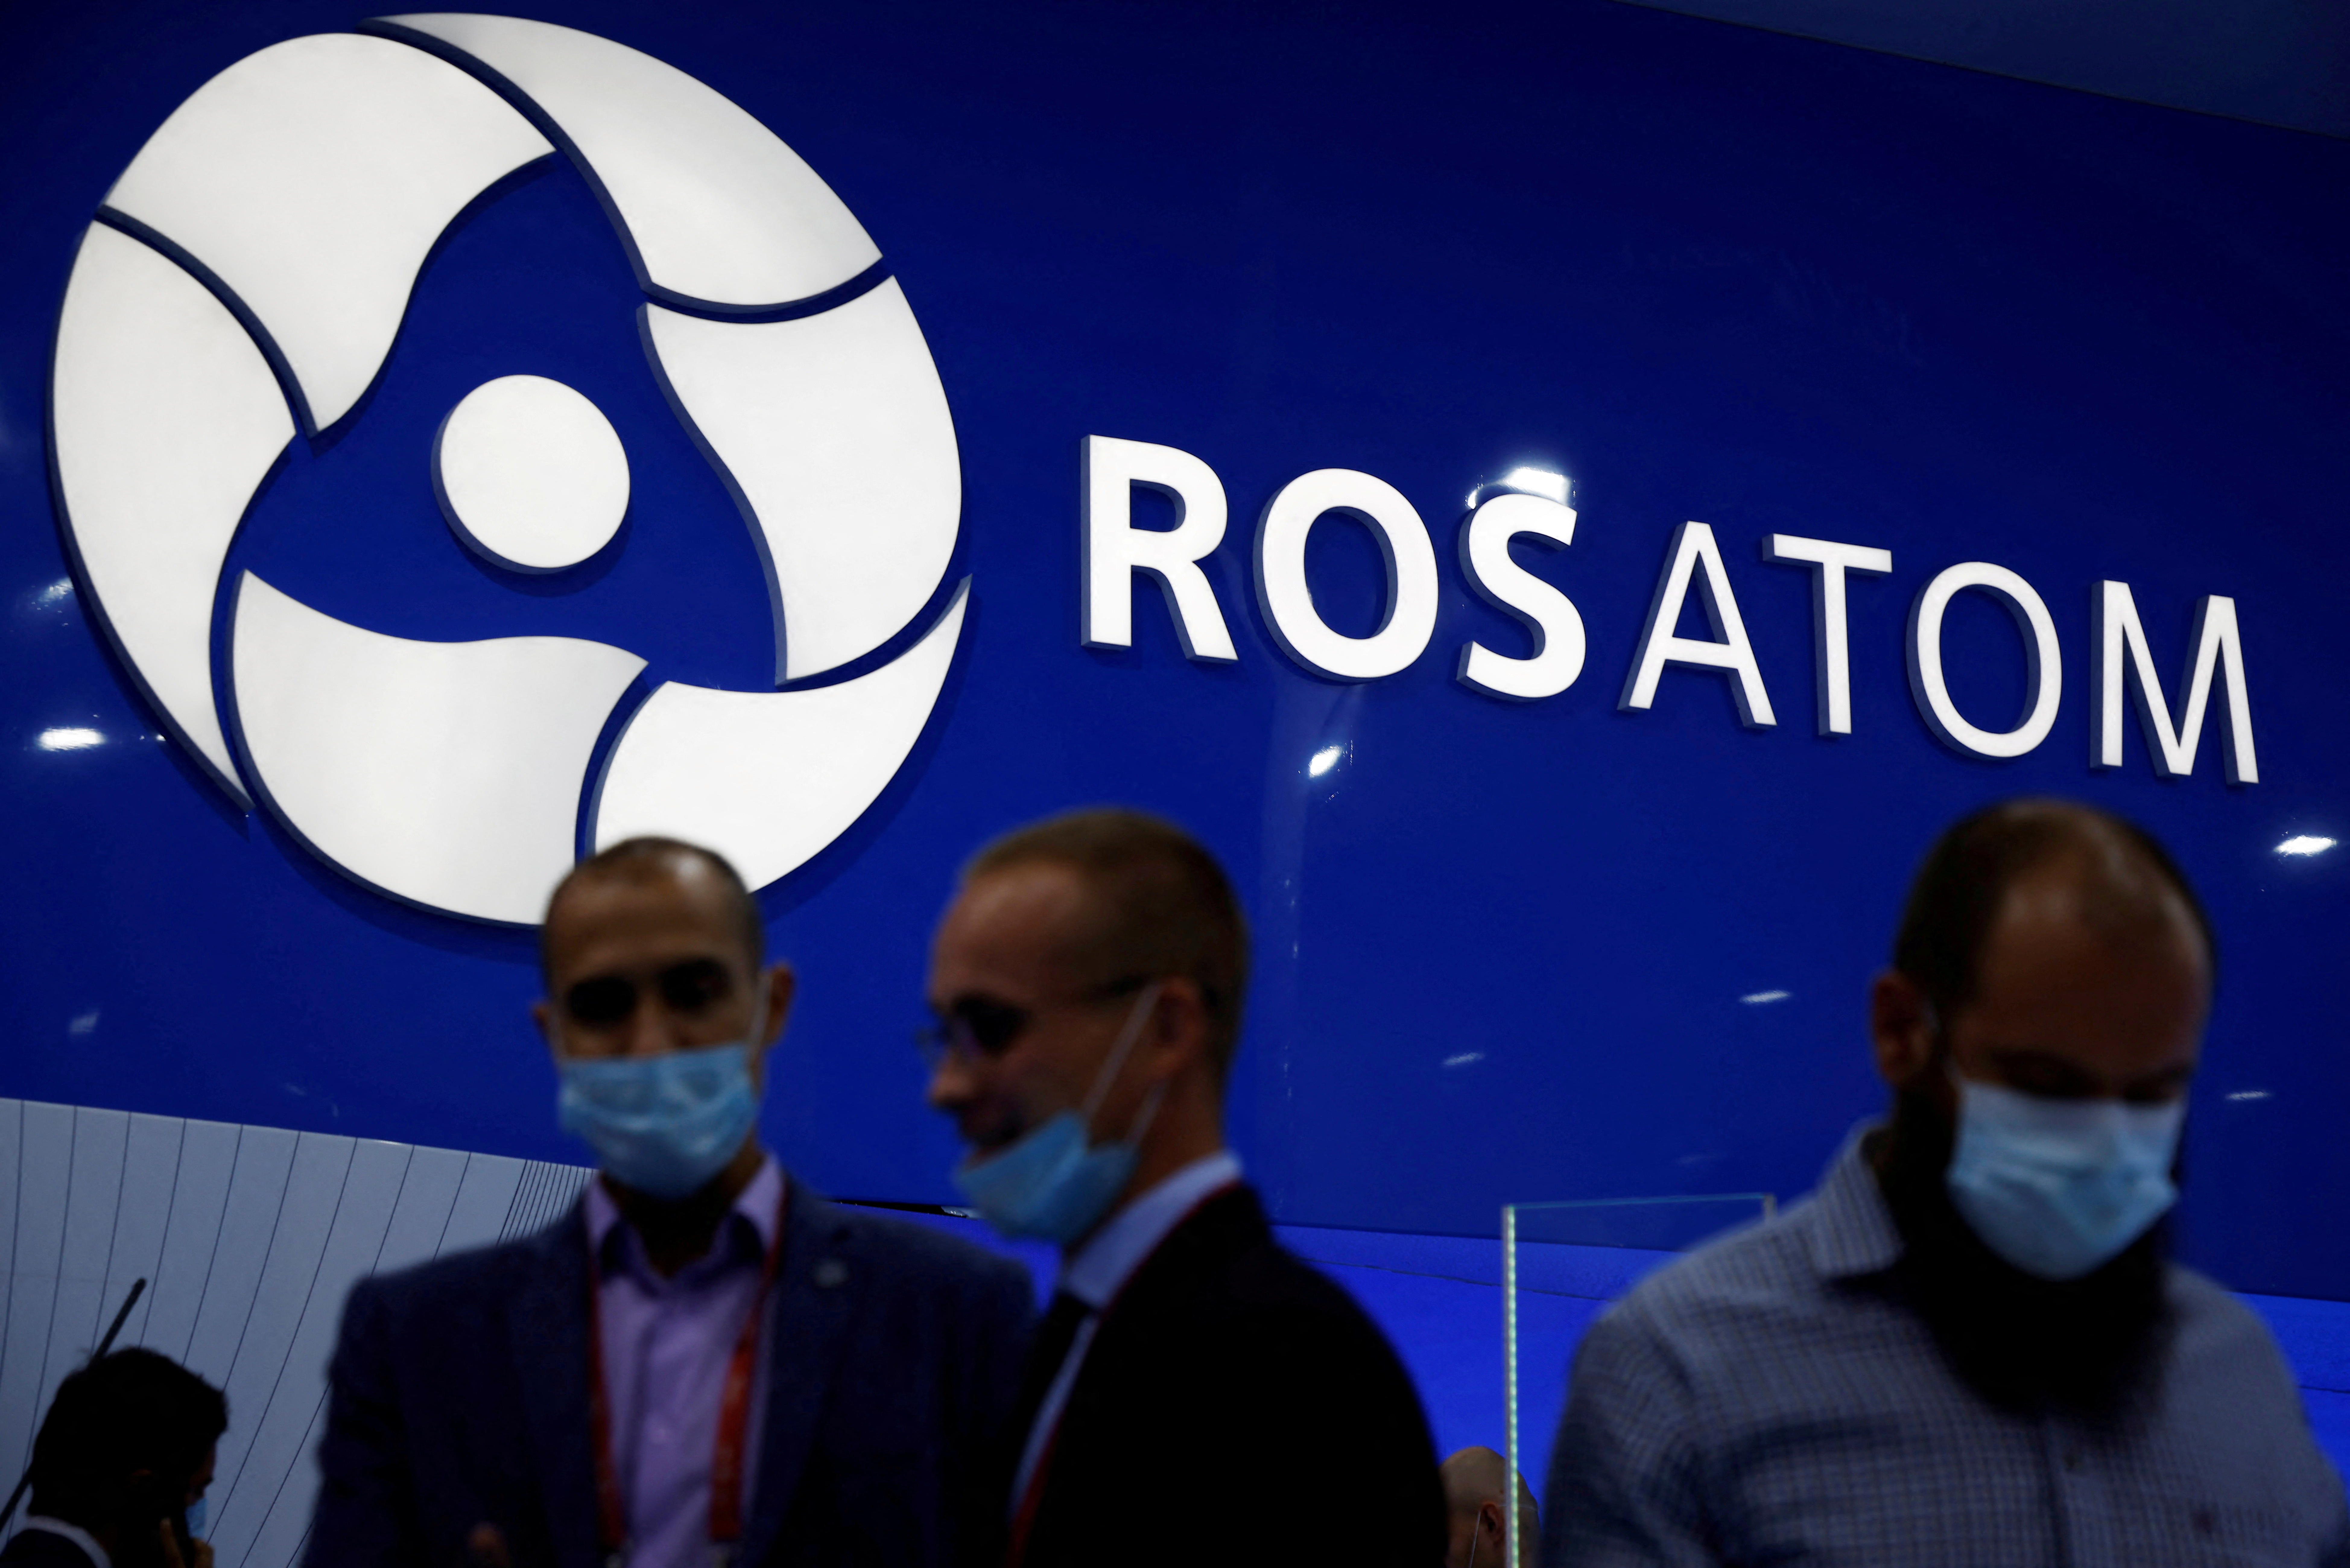 Participants are seen at the stand of Russian state nuclear agency Rosatom during the International military-technical forum 